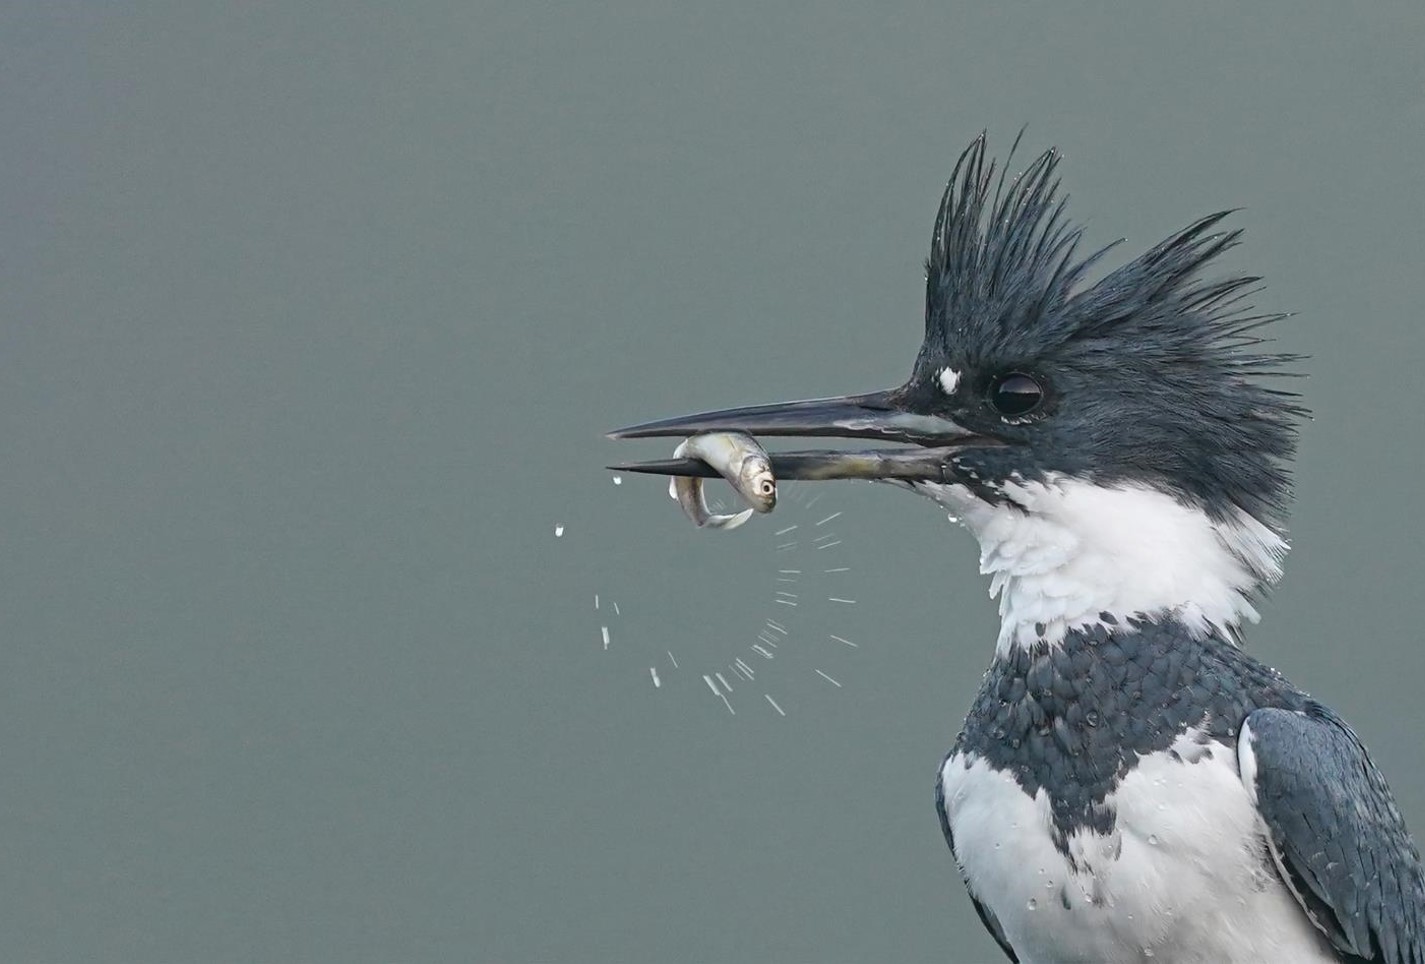 "The Catch-Belted Kingfisher" Novice 1st Place: Maria Khvan, West Chester, PA